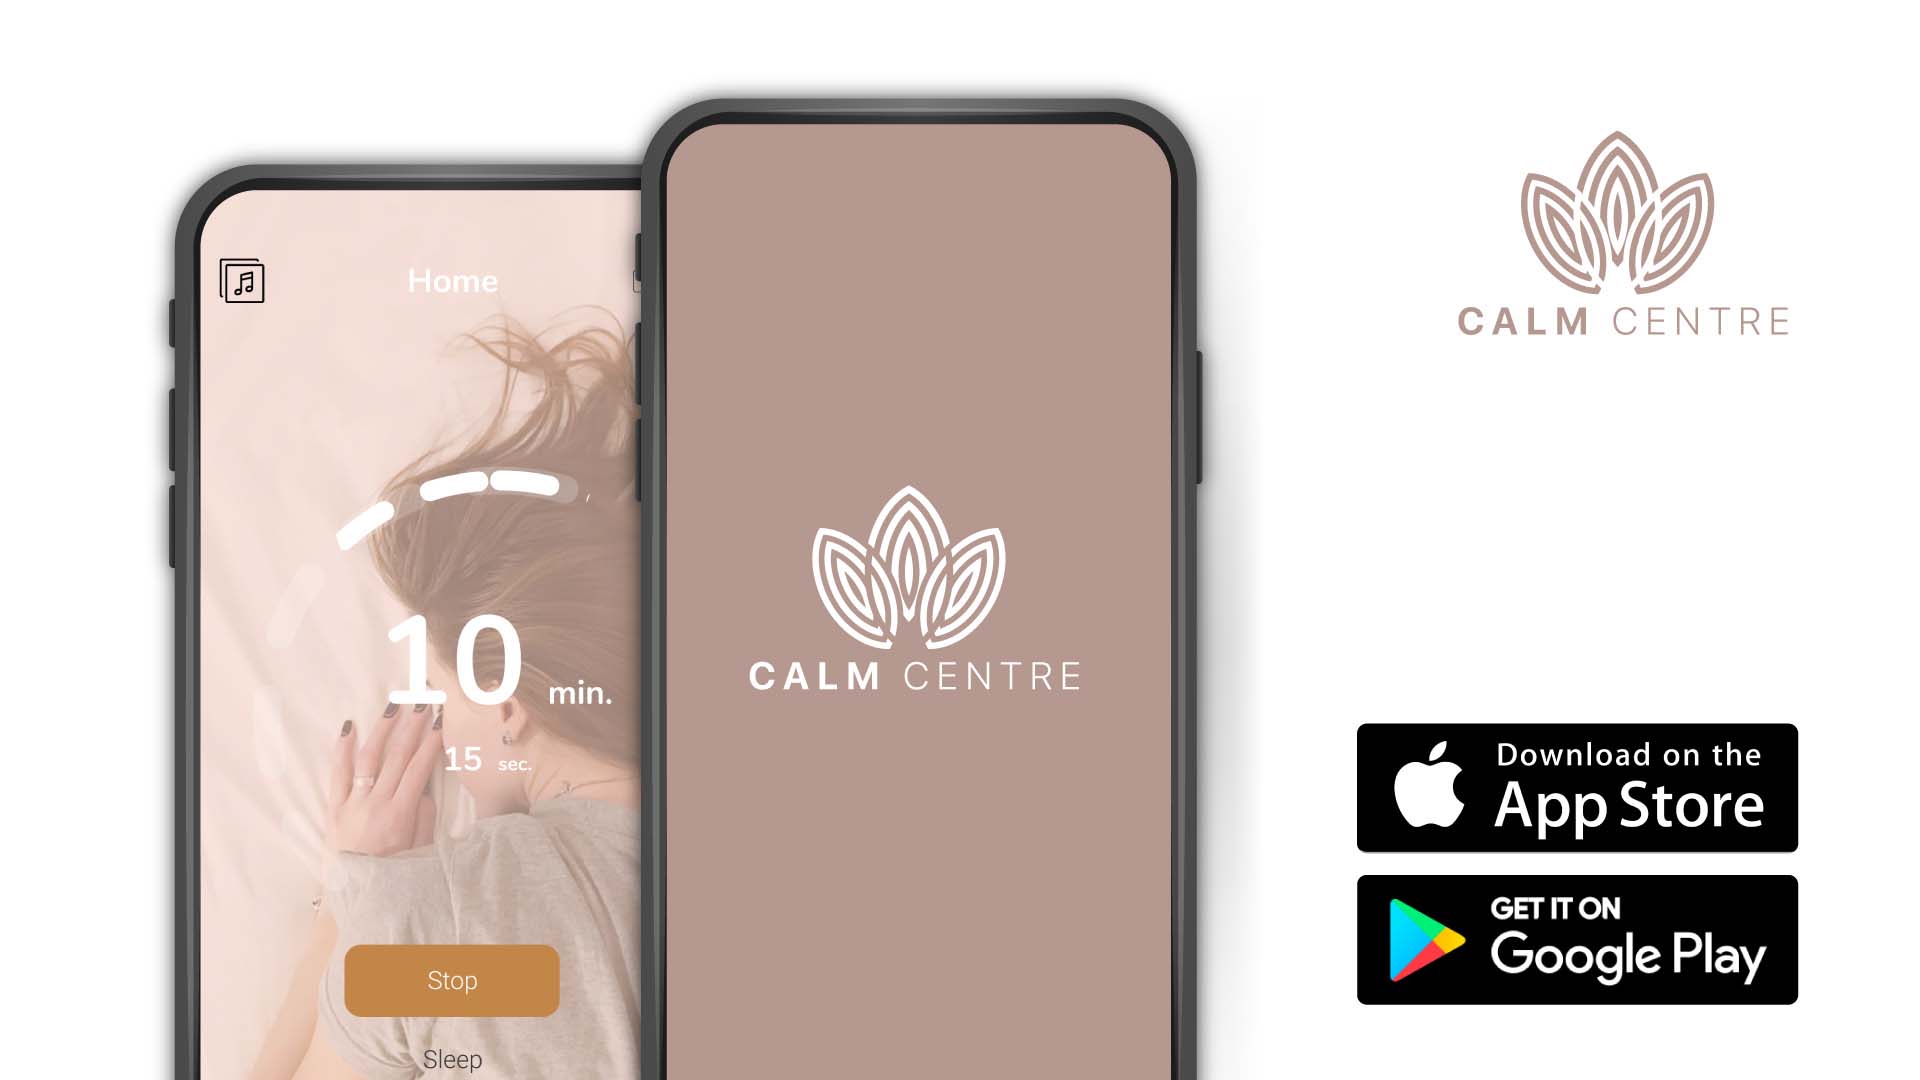 The Calm Centre App brought to you by Identity Pixel - App Design & Development in Essex